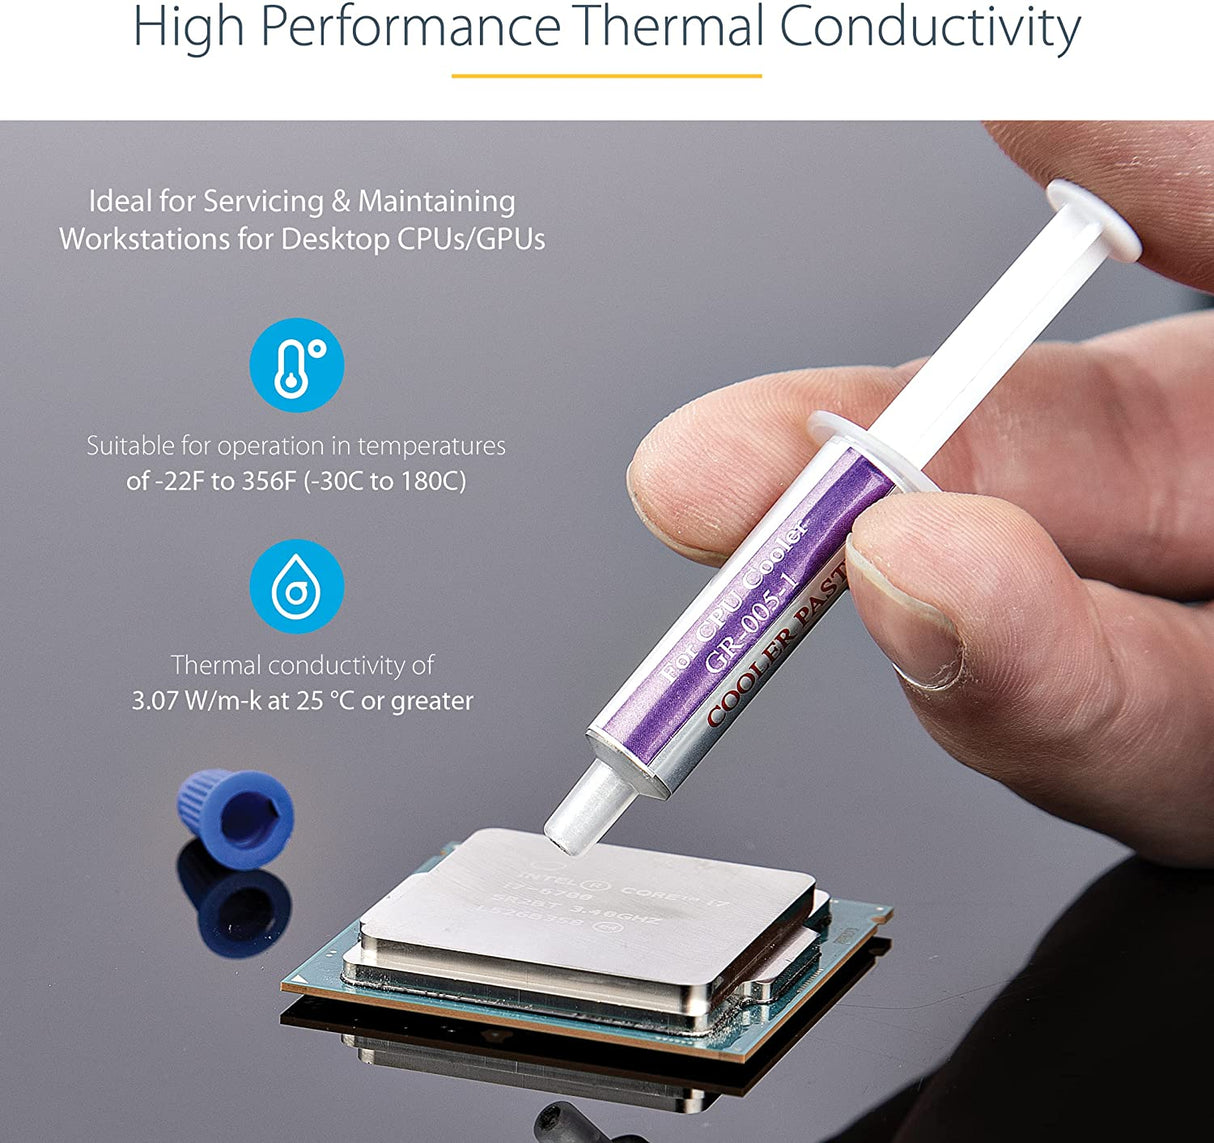 Product  StarTech.com Thermal Paste, High Performance Thermal